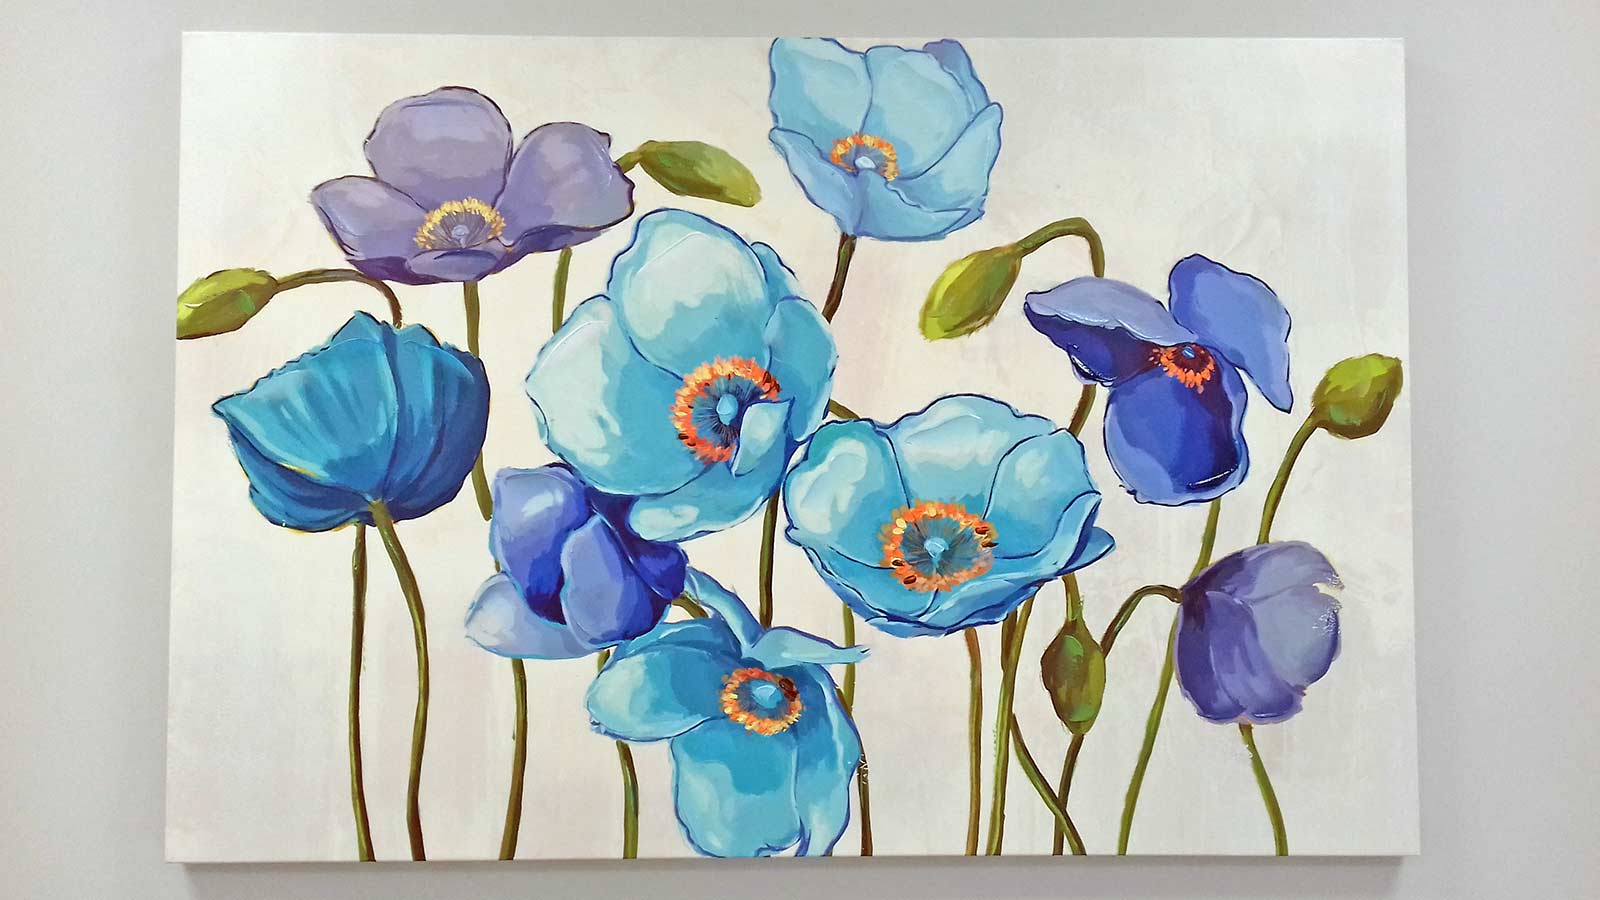 Good decor like this art work is one of the Reasons to rent a Therapy Room - a painting of blue poppies